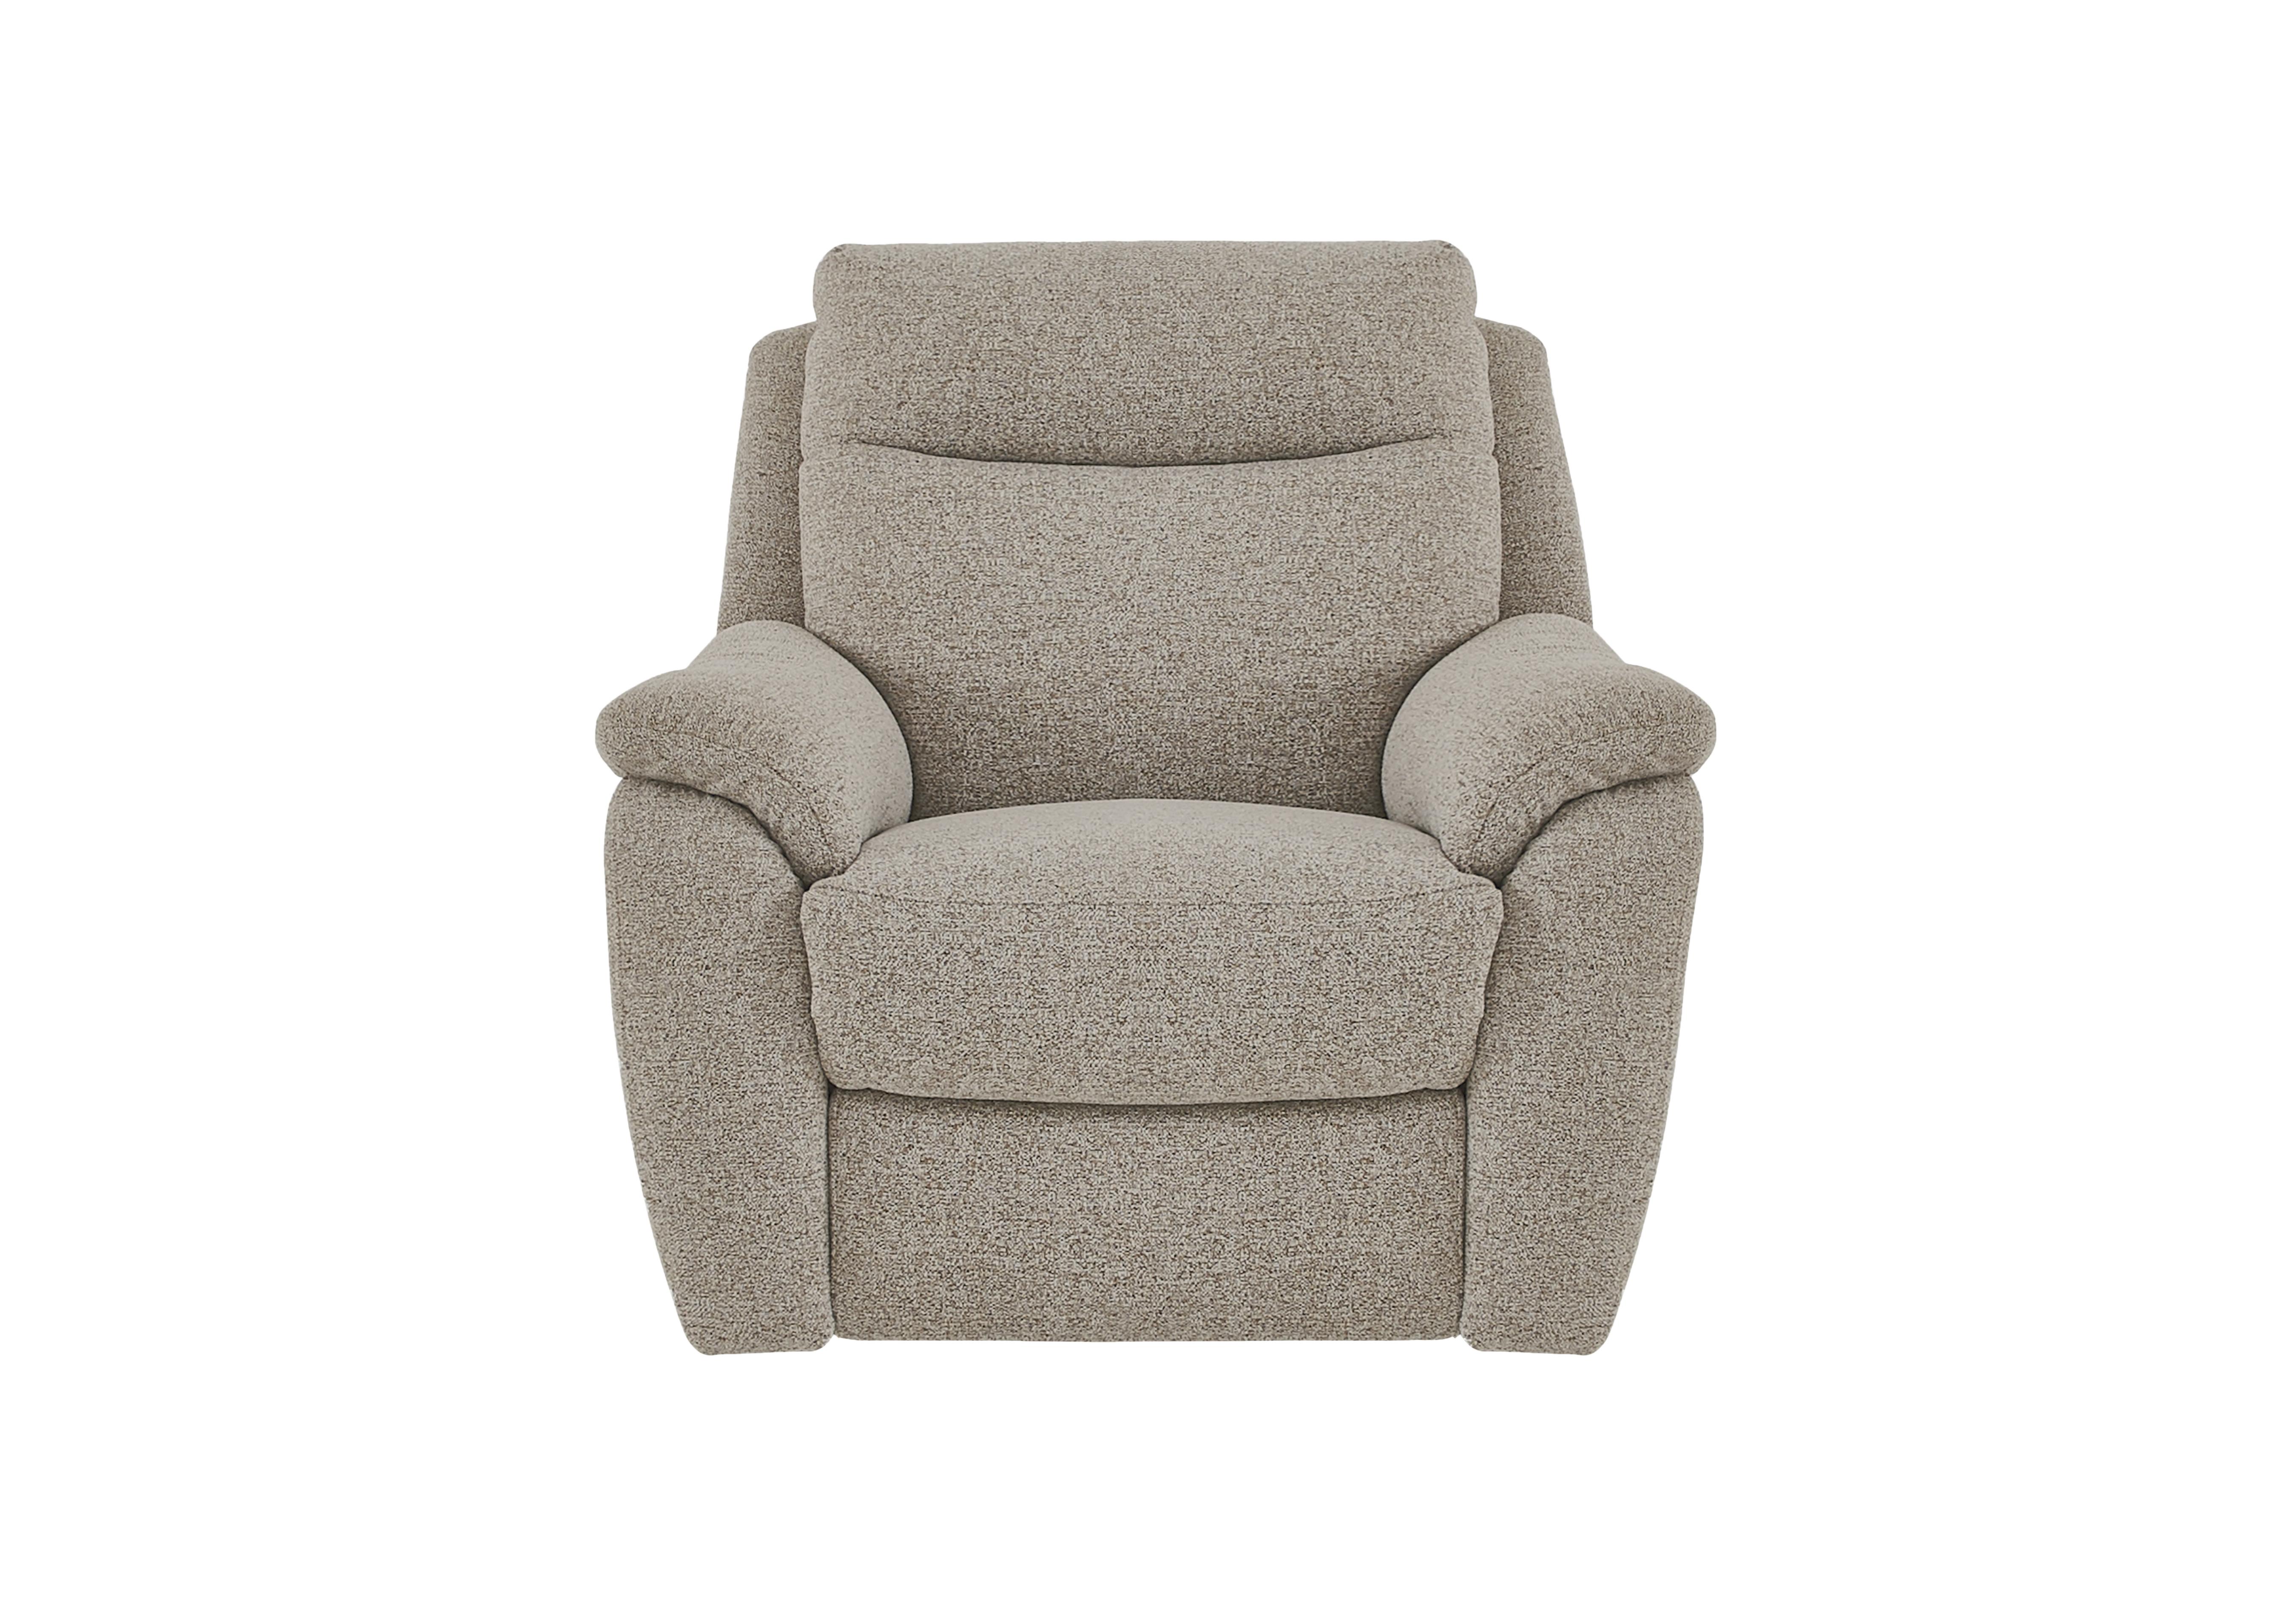 Snug Fabric Armchair in Fab-Chl-R25 Biscuit on Furniture Village